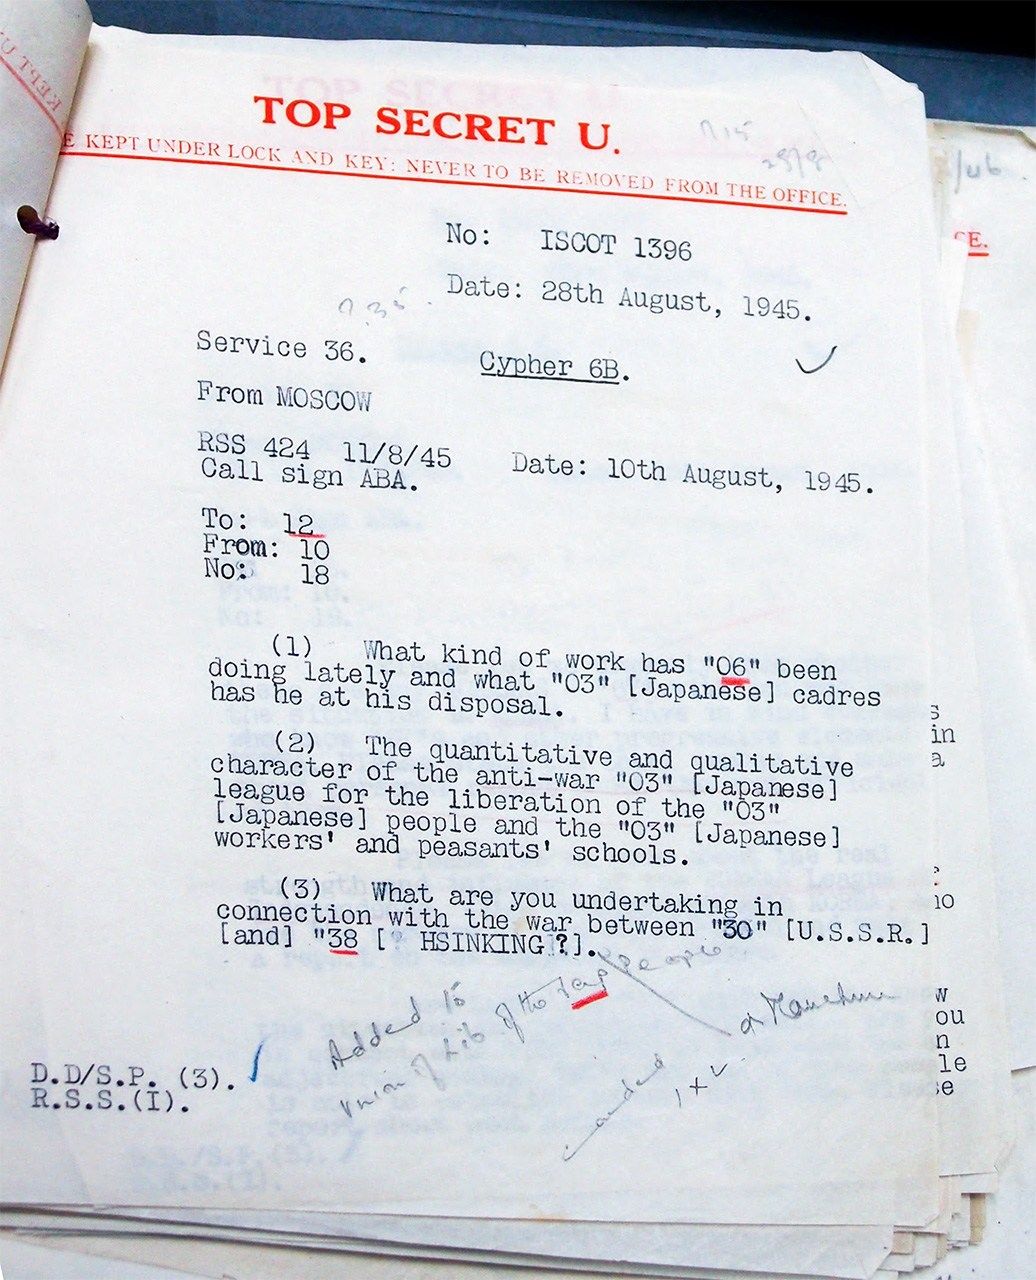 An intercepted encoded telegram sent from Moscow to the CPC on August 10, 1945, inquiring into the situation in Yan’an. (HW/17/42, UK National Archives, Kew, London)